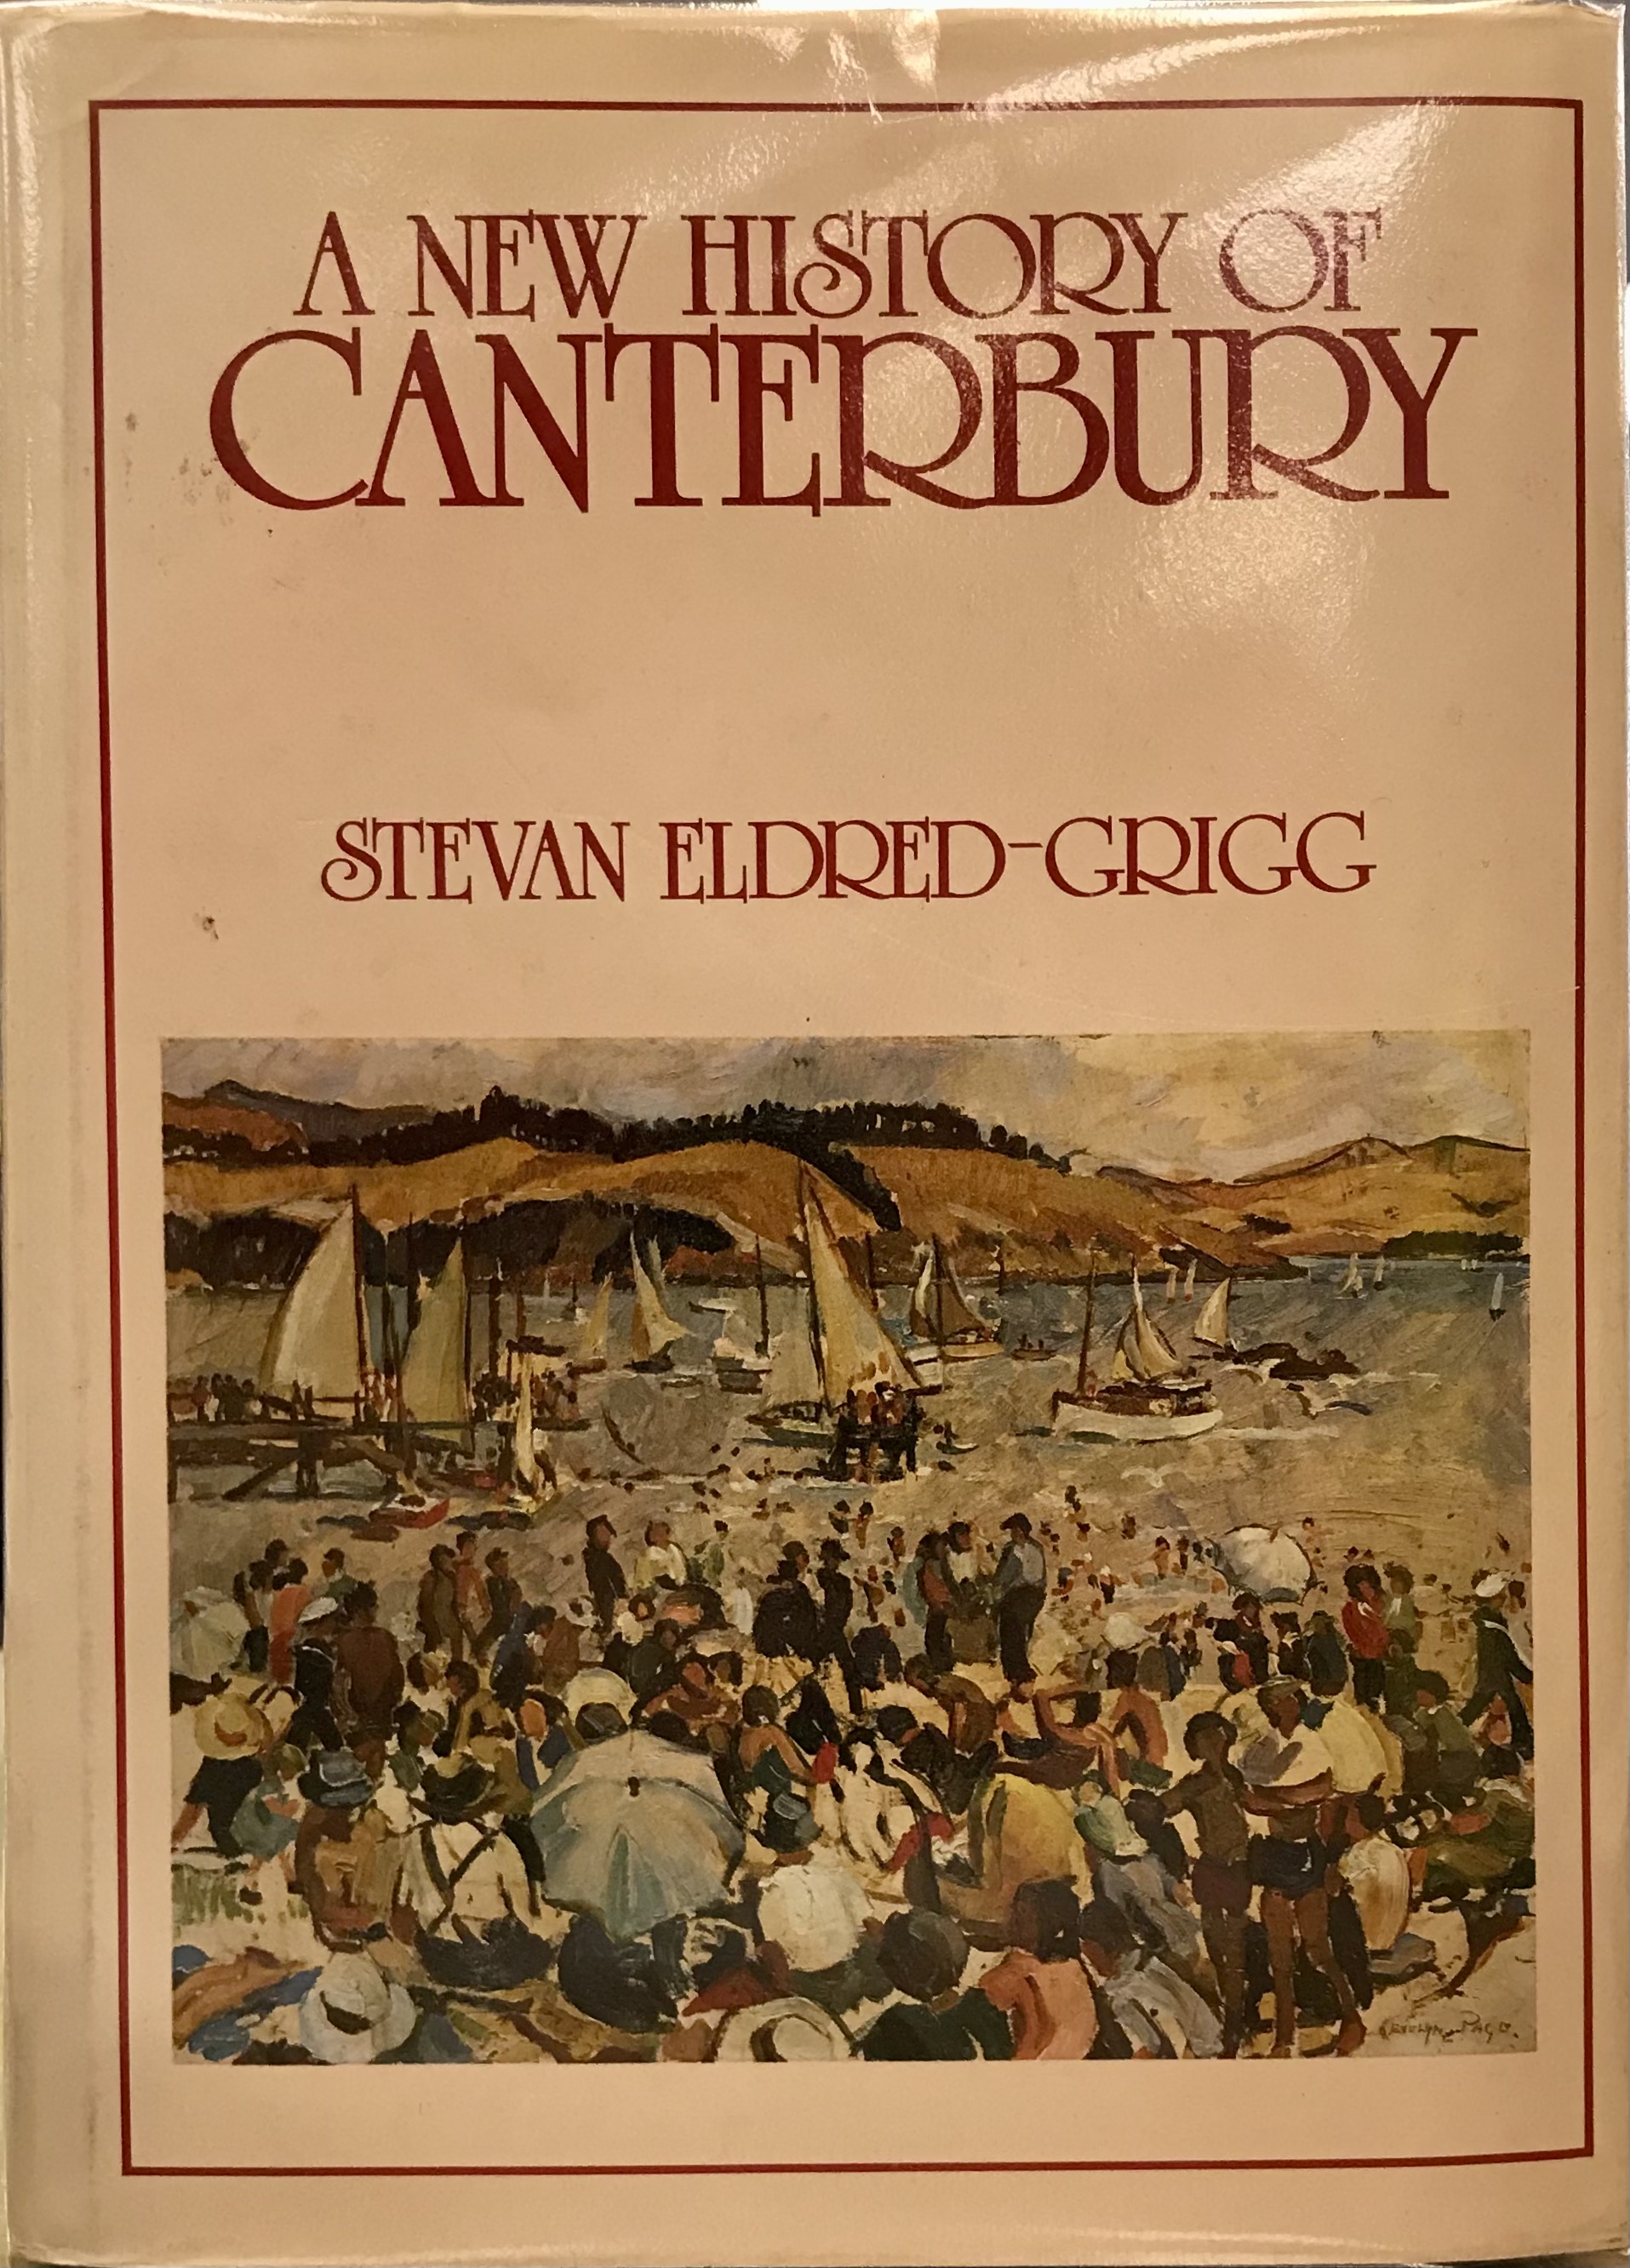 A New History of Canterbury